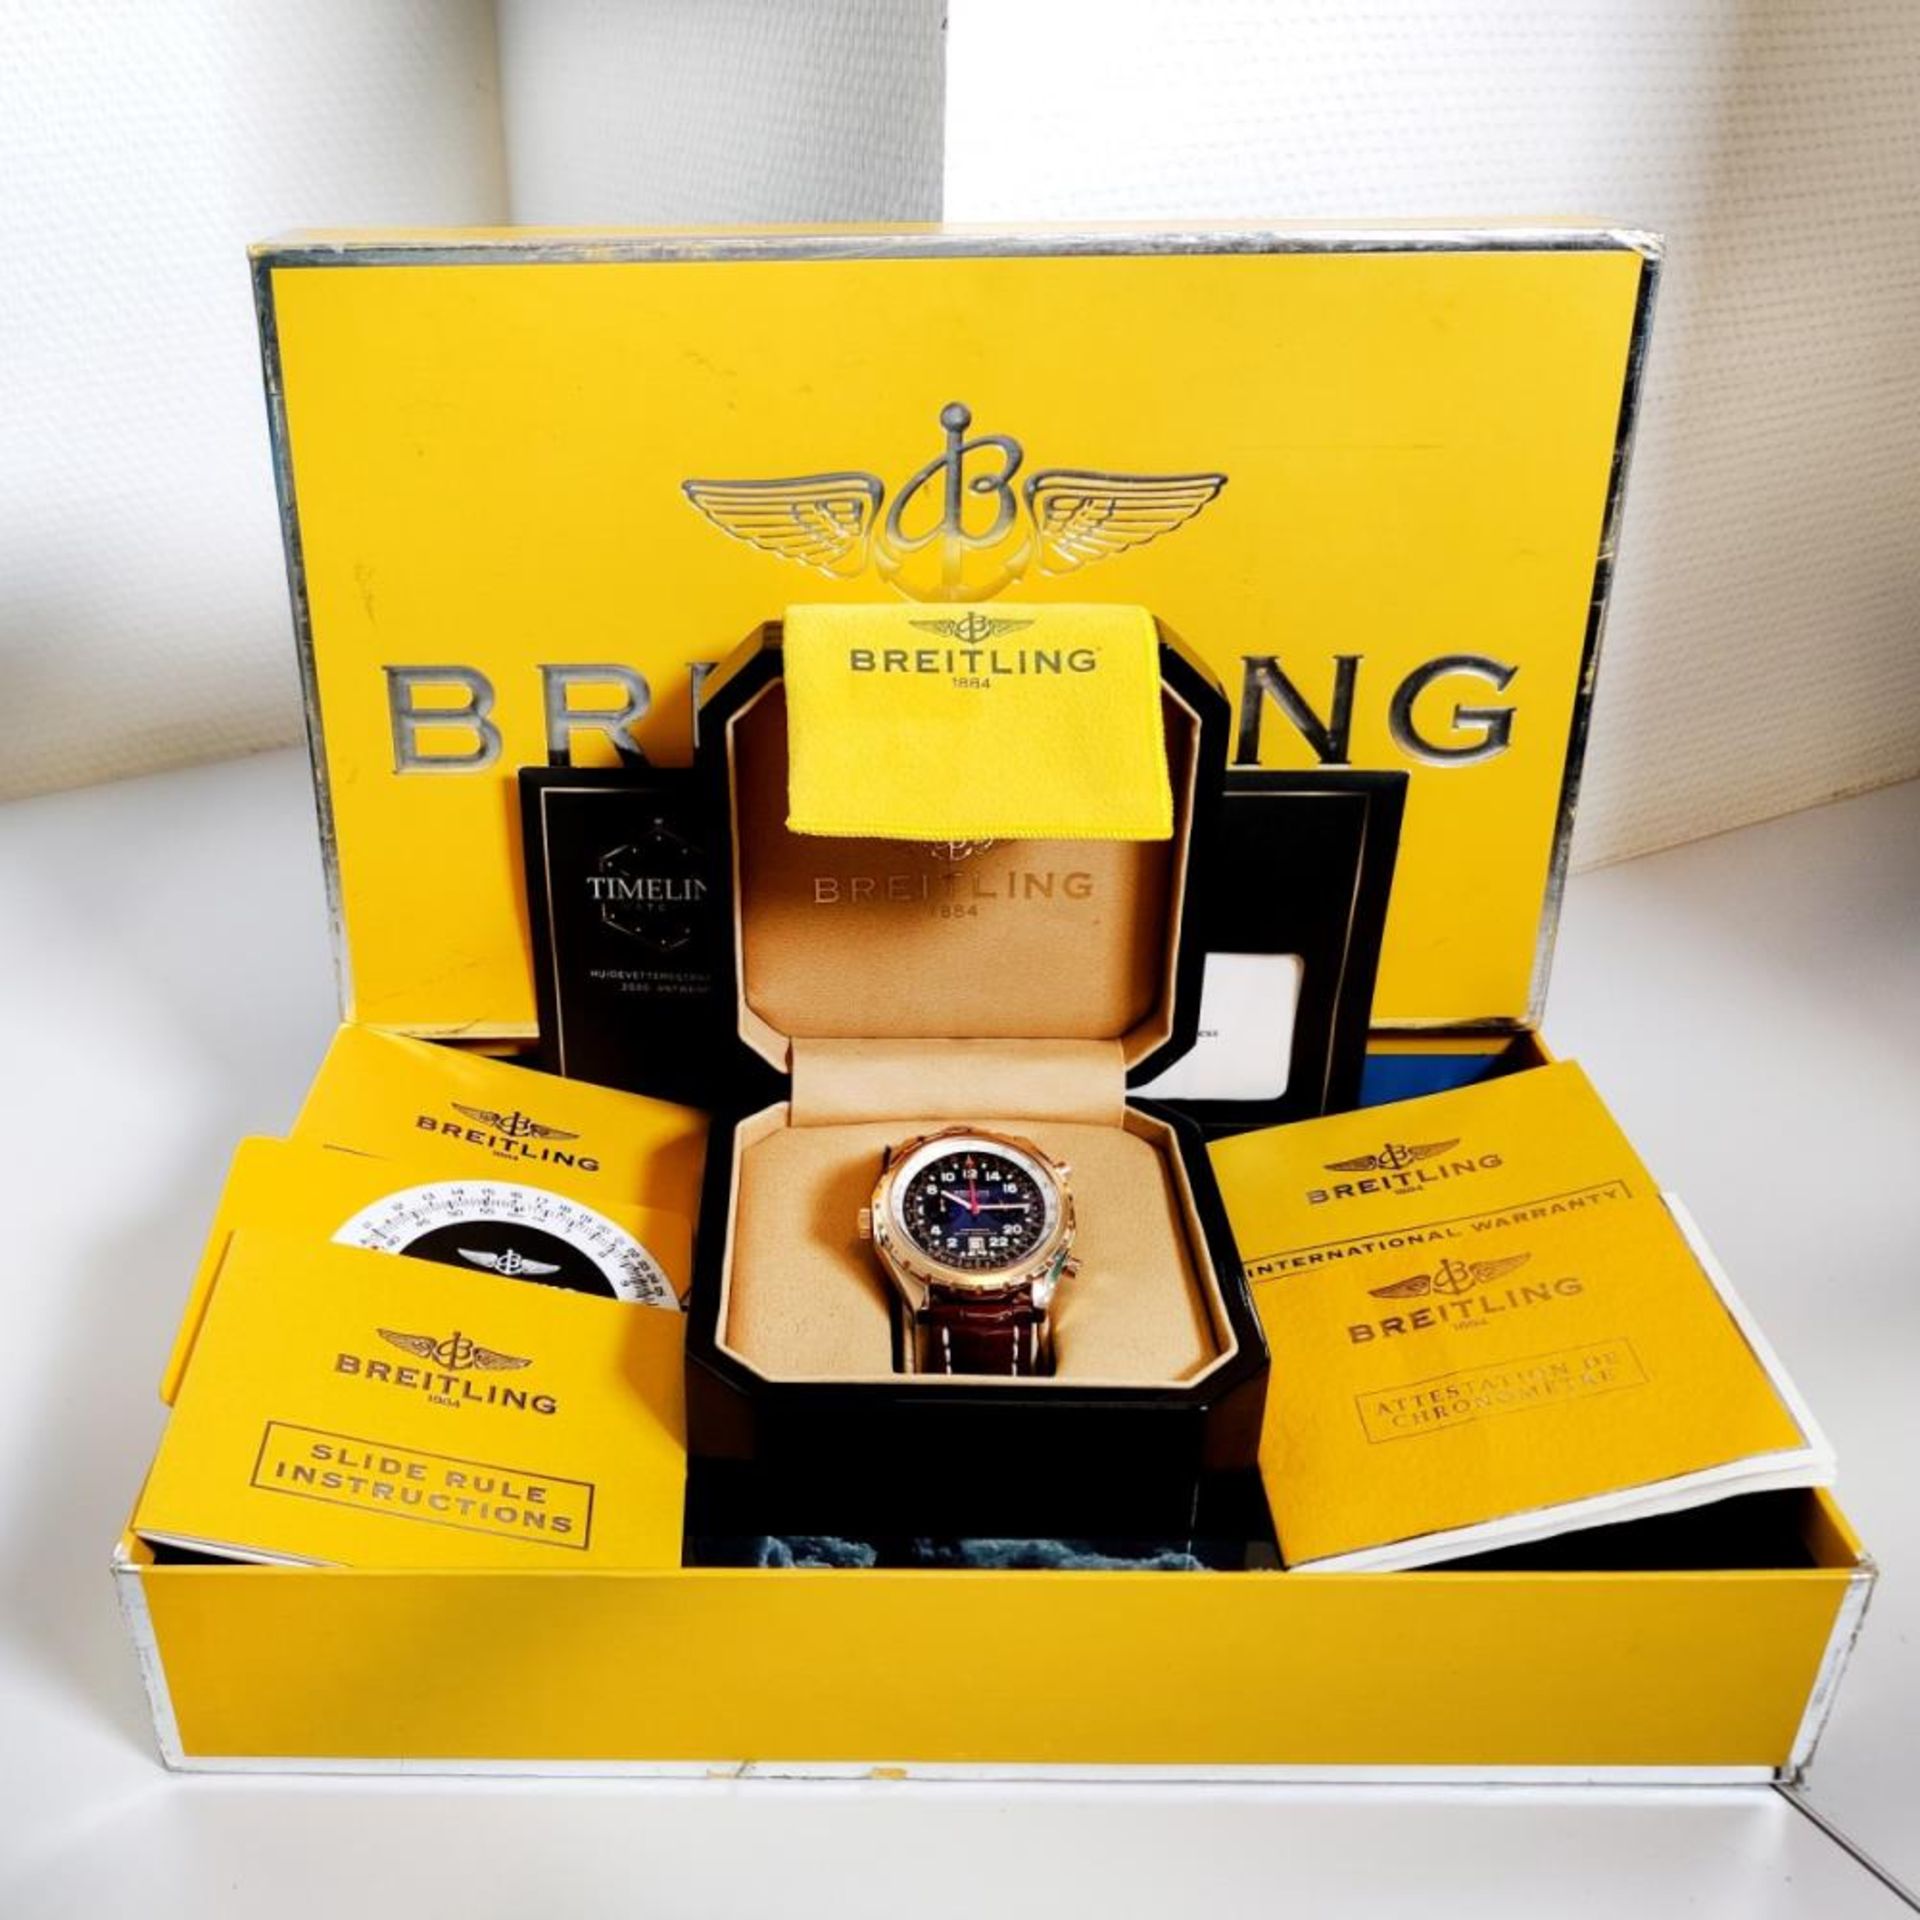 Breitling Chrono-Matic H22360 - Men's watch - 2006. - Image 12 of 12